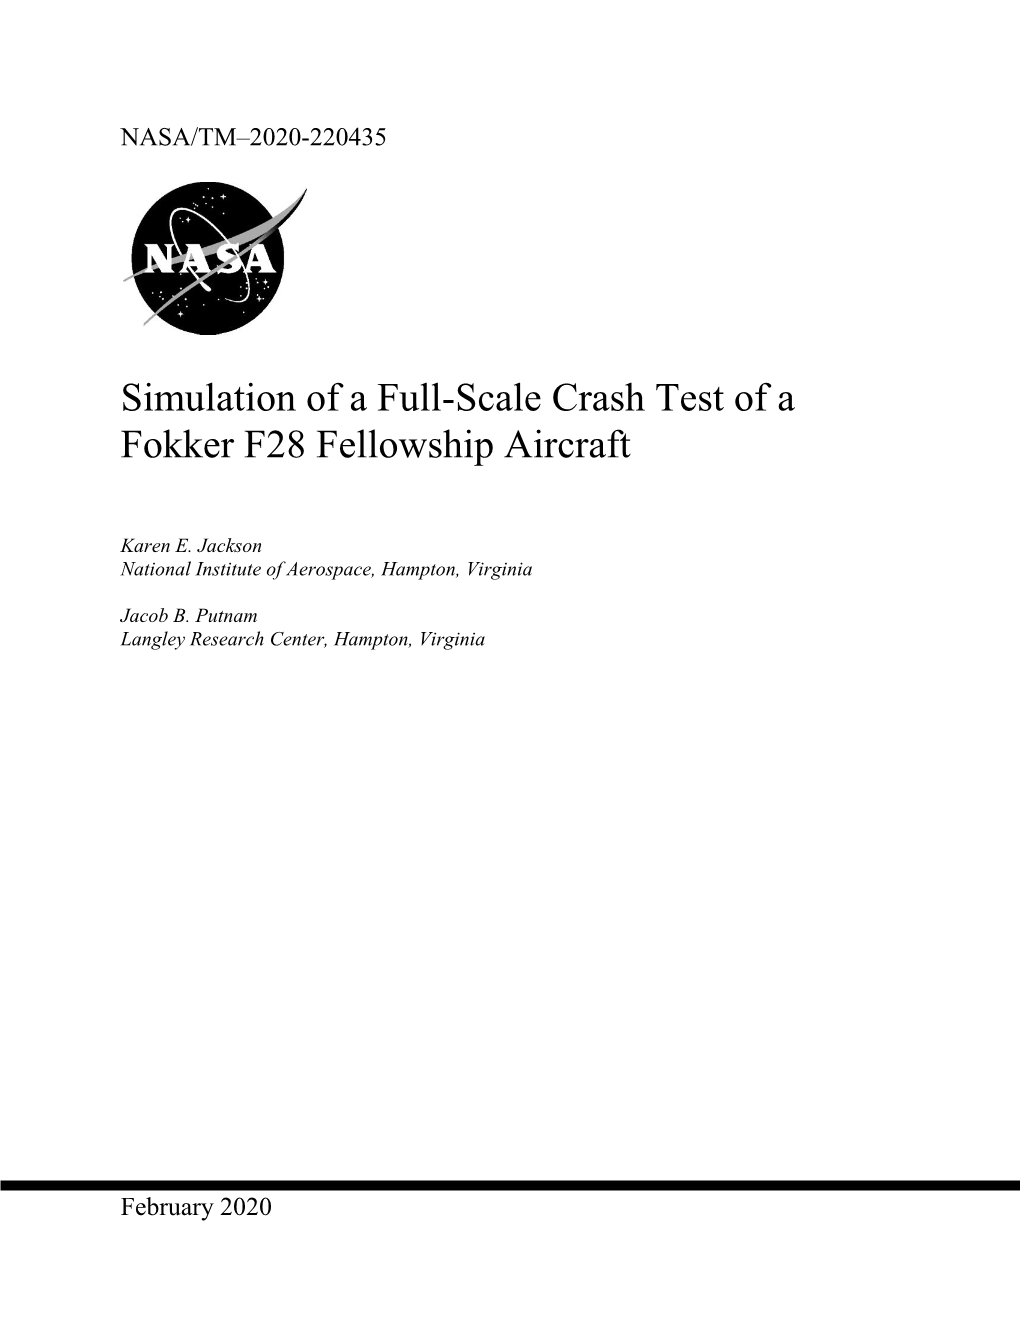 Simulation of a Full-Scale Crash Test of a Fokker F28 Fellowship Aircraft